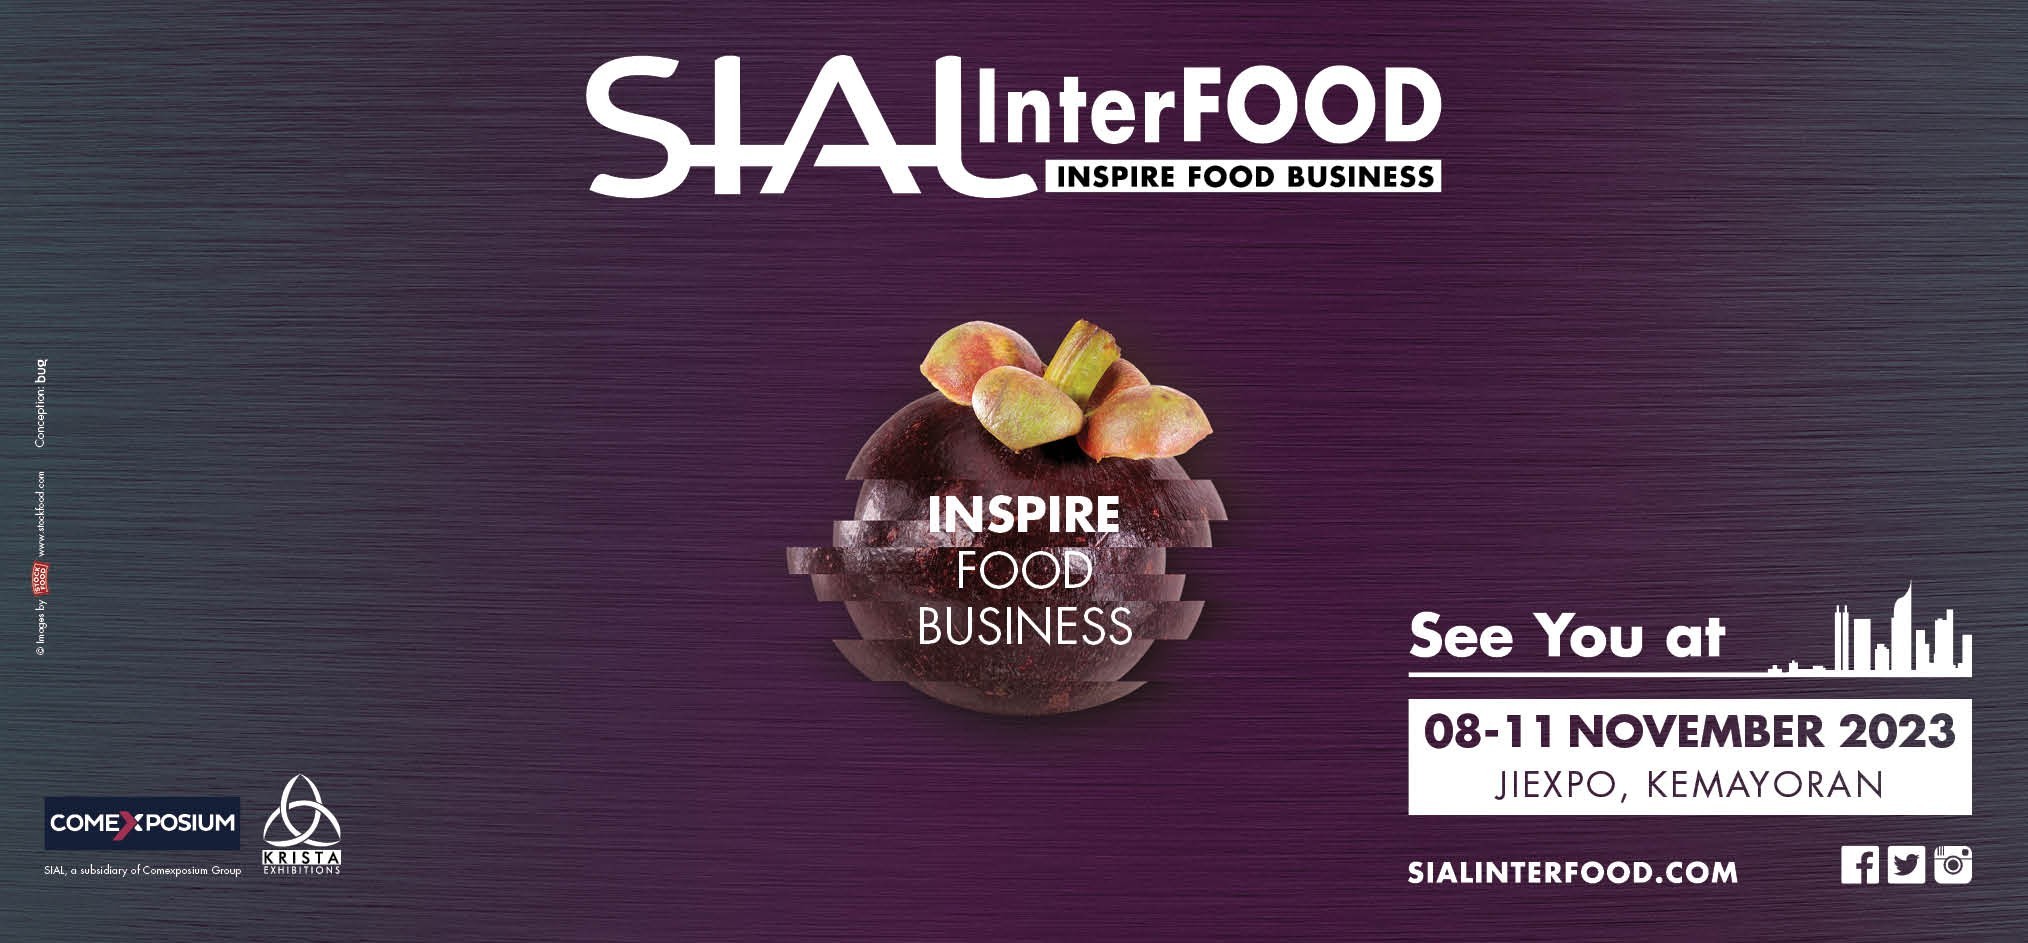 Meeting you at SIAL InterFOOD JAKARTA Indonesia